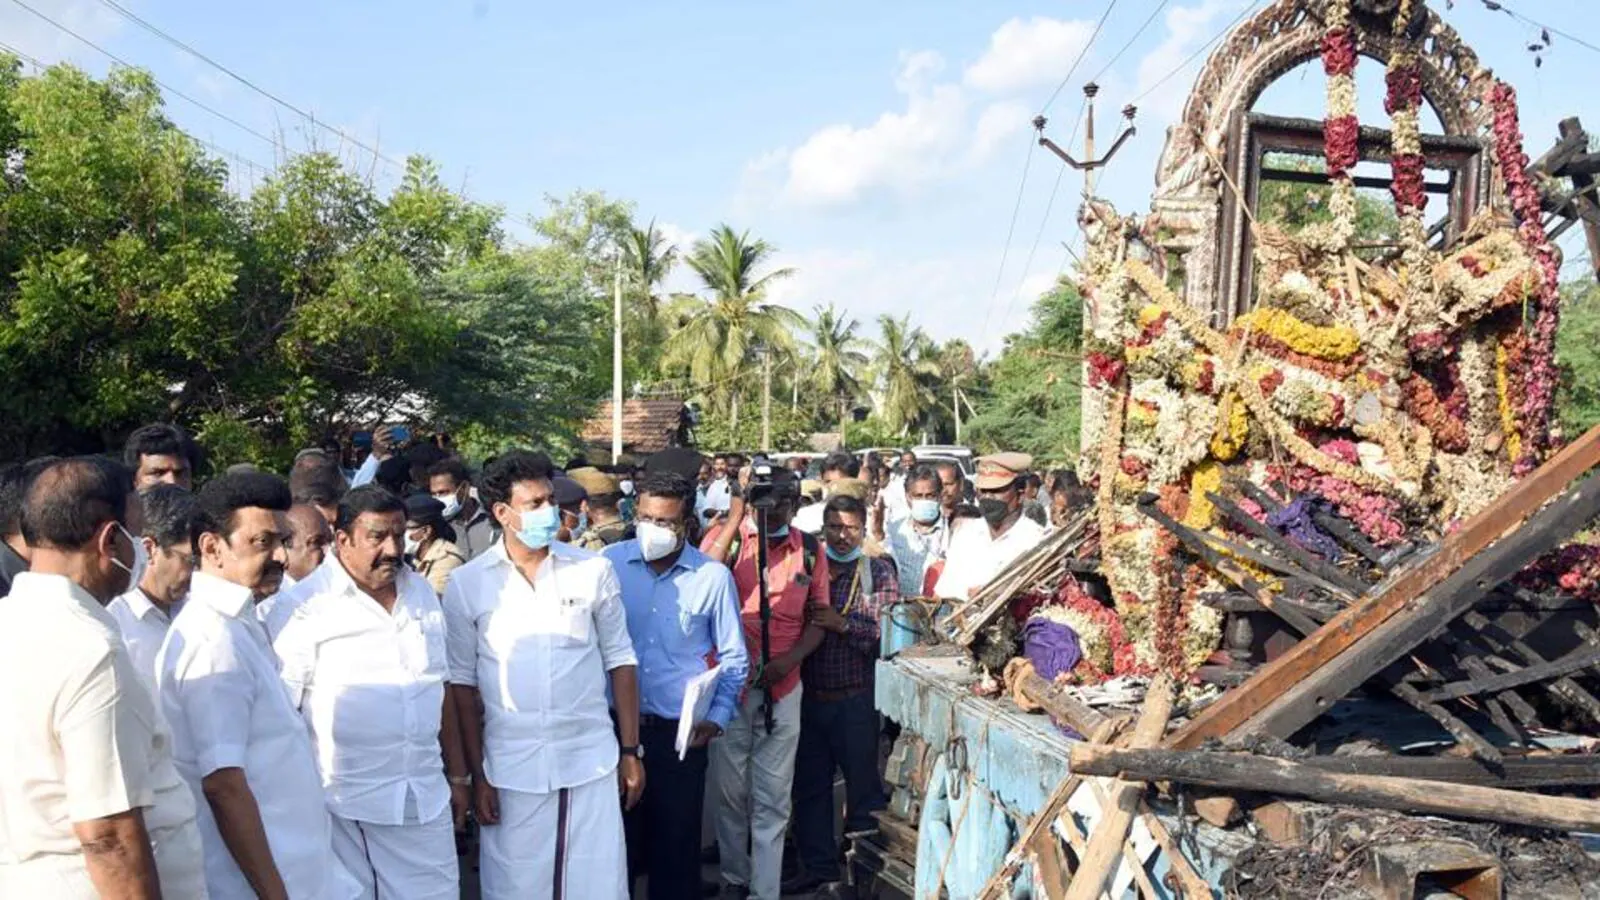 Festivities turn into tragedy as pall of gloom descends on Thanjavur village